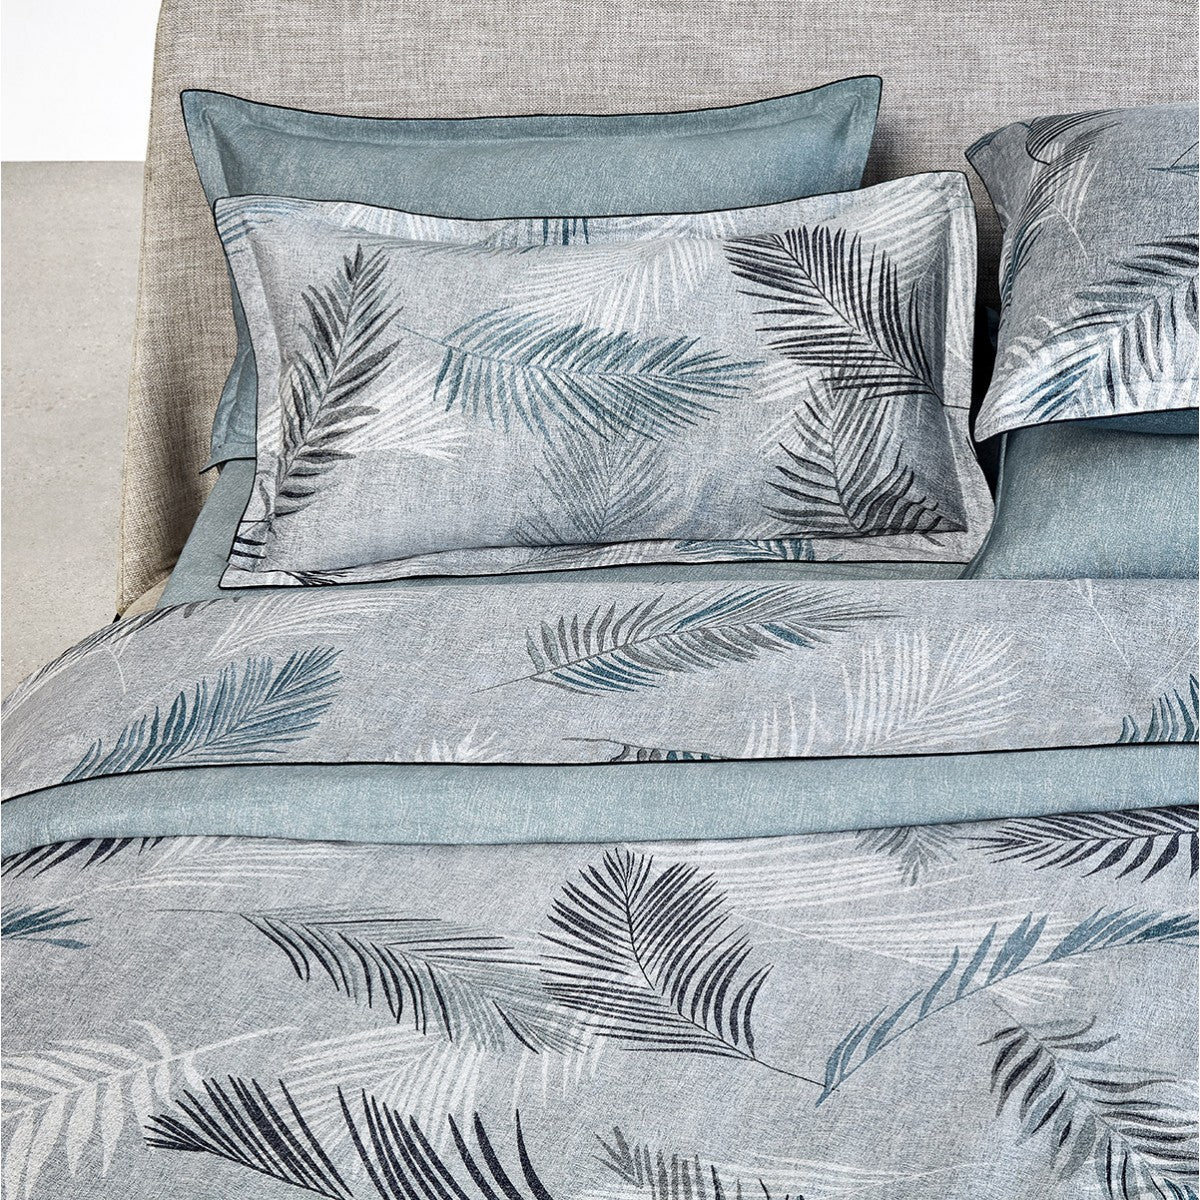 Ryad Bedding by Hugo Boss for Yves Delorme